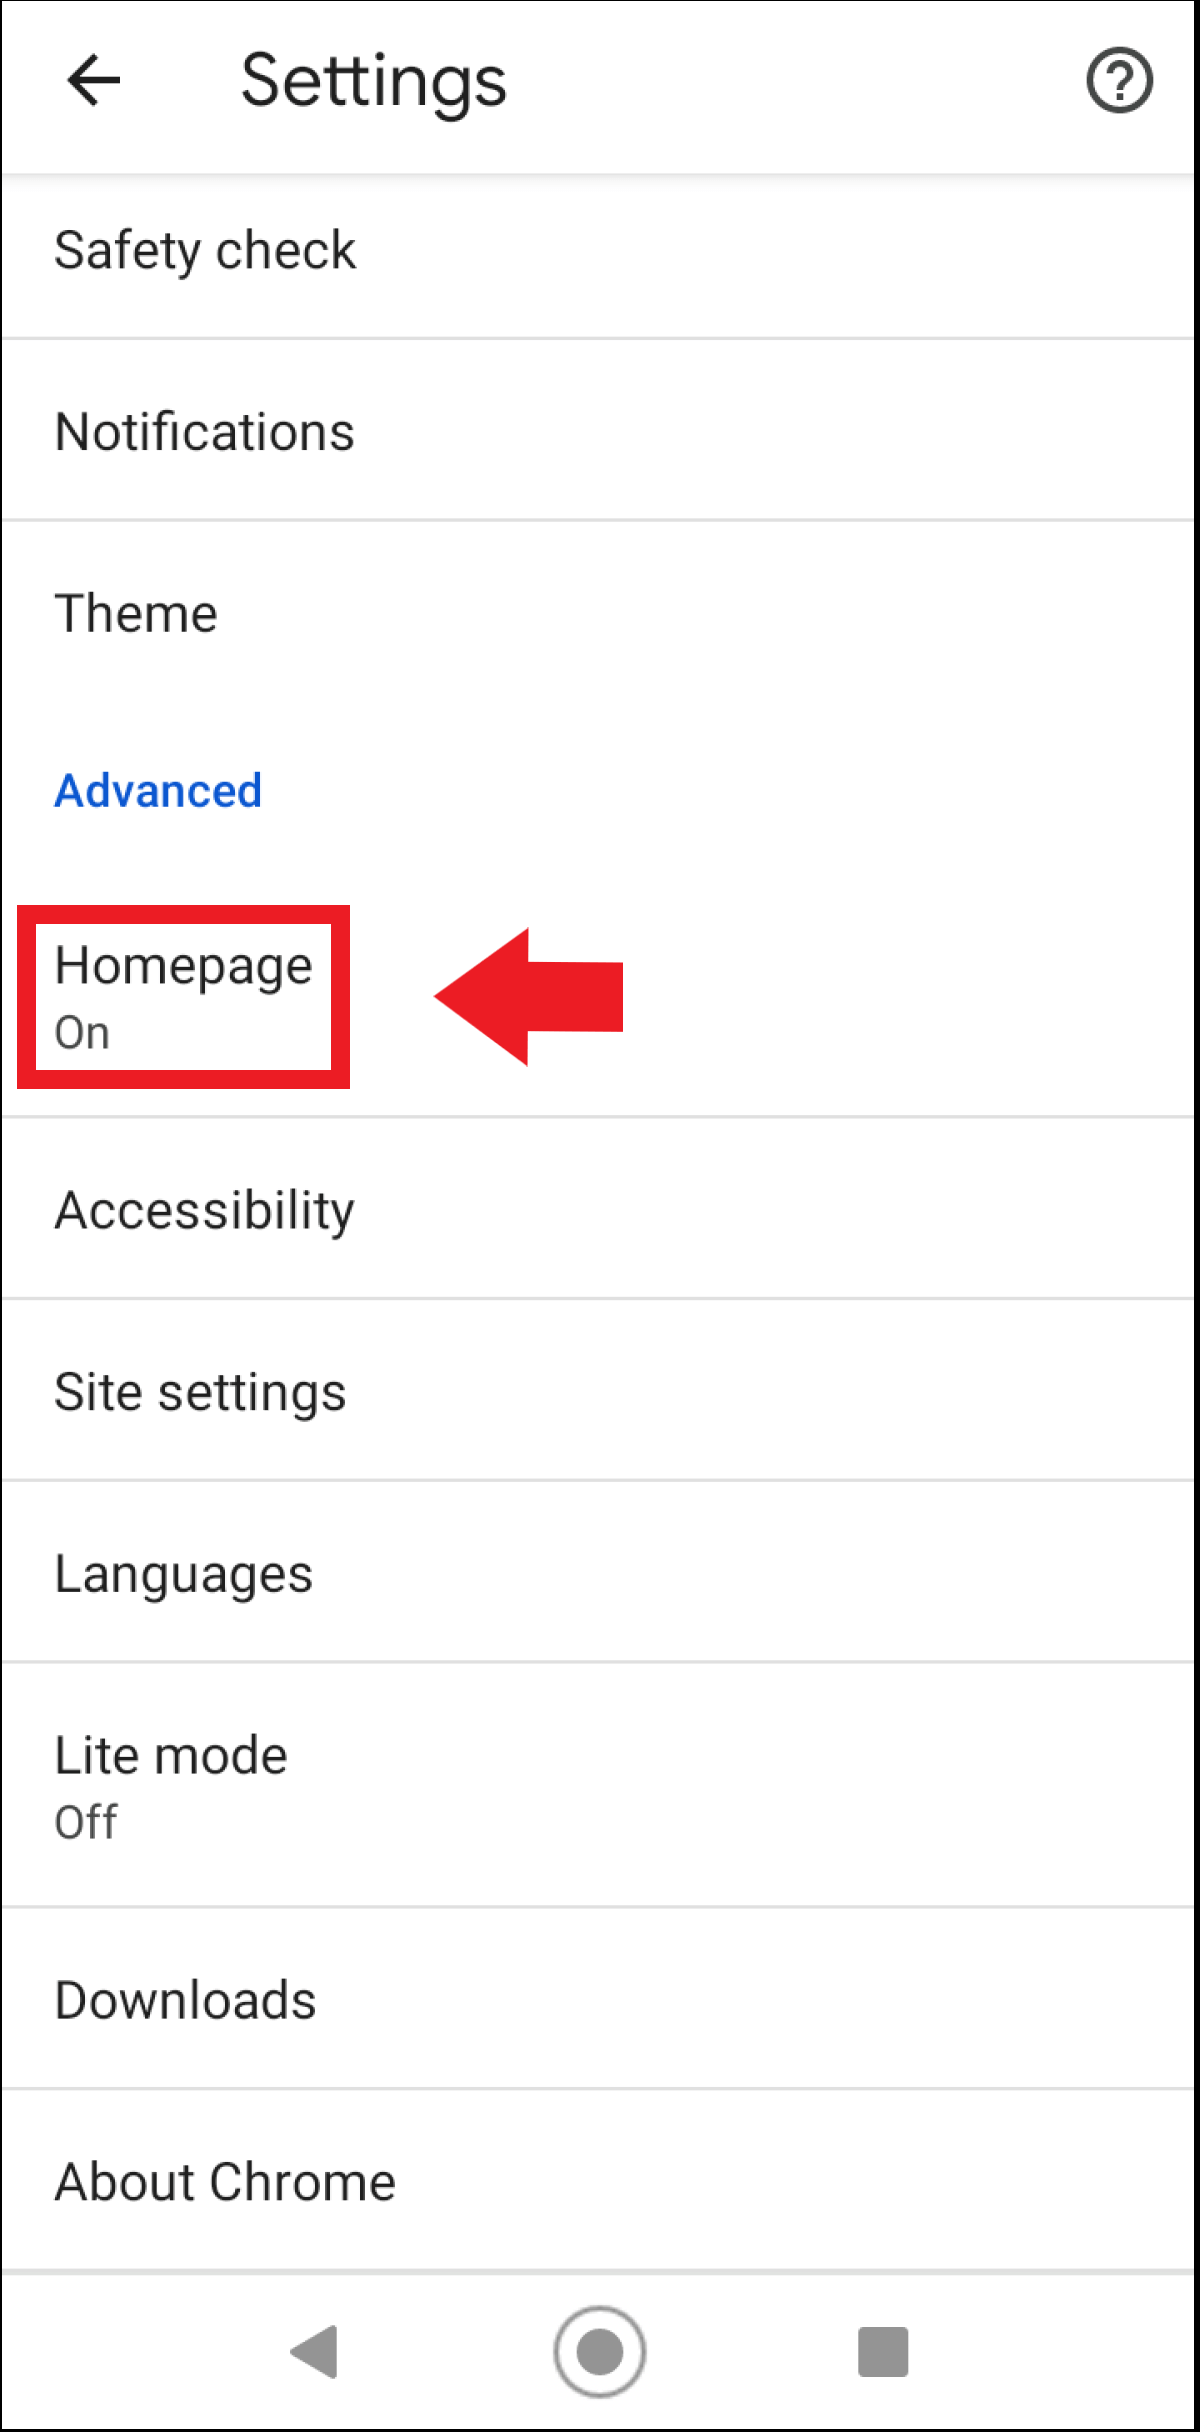 Select “Homepage” in the settings menu of your Chrome app